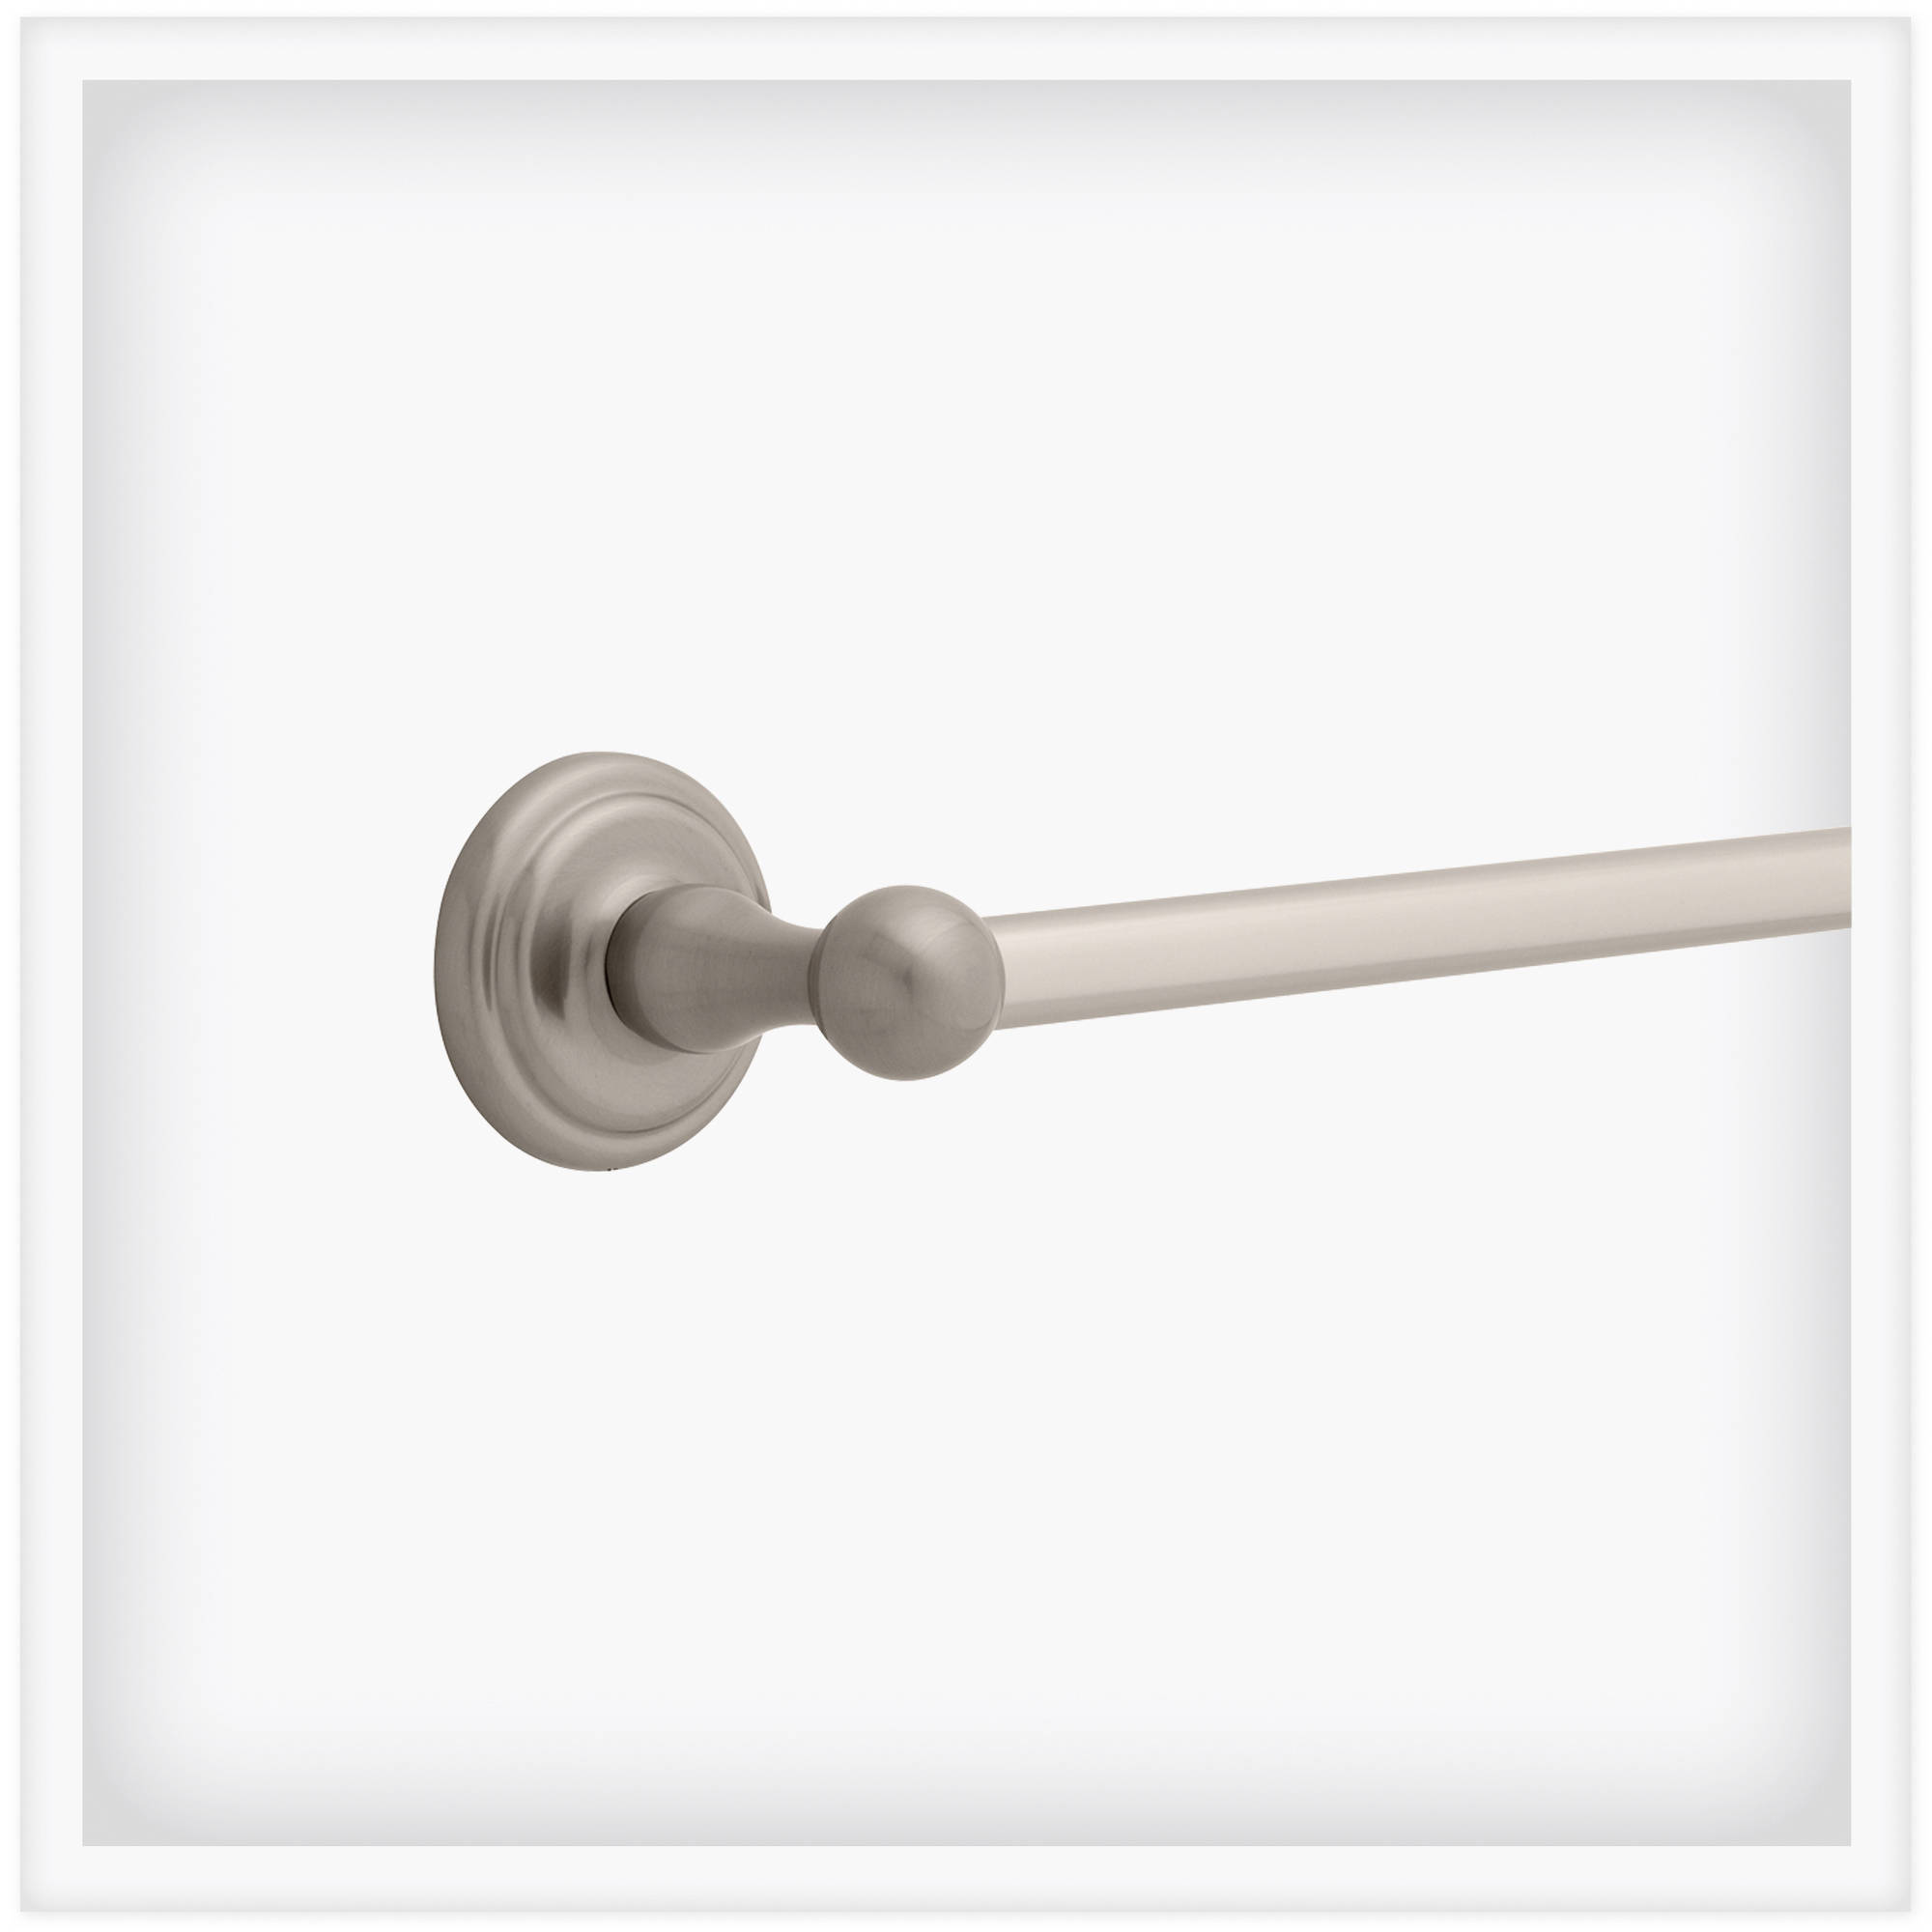 Franklin Brass Jamestown Towel Bar, Available in Multiple Colors and Sizes - image 3 of 3